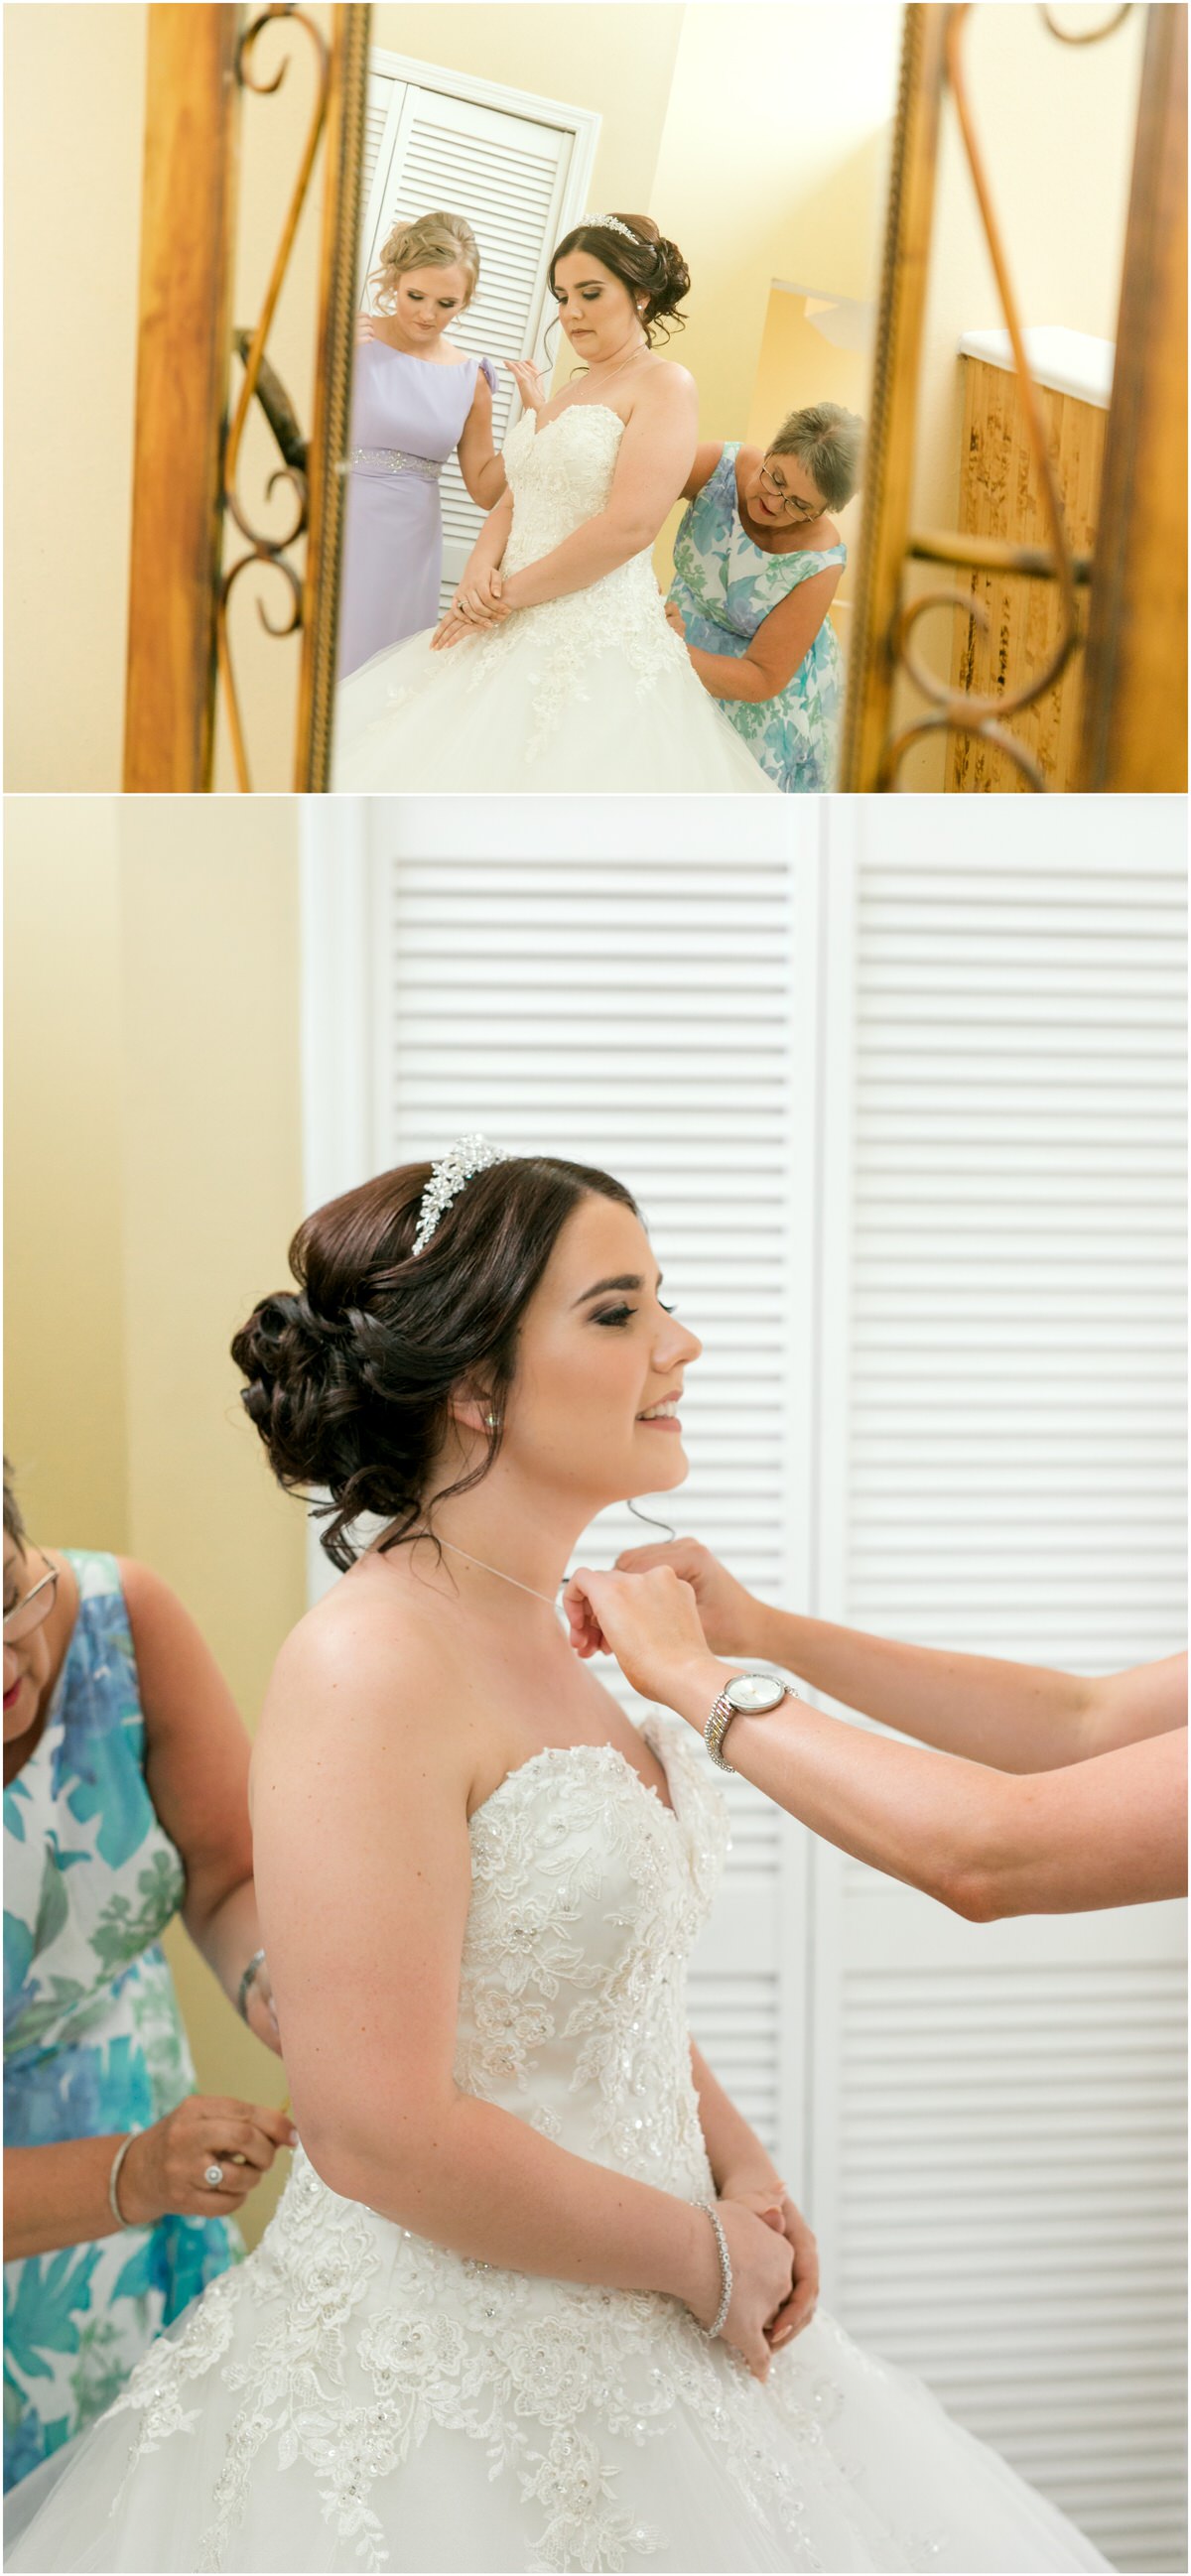 Bride having her dress buttoned up while her bridesmaid puts a necklace on her. 